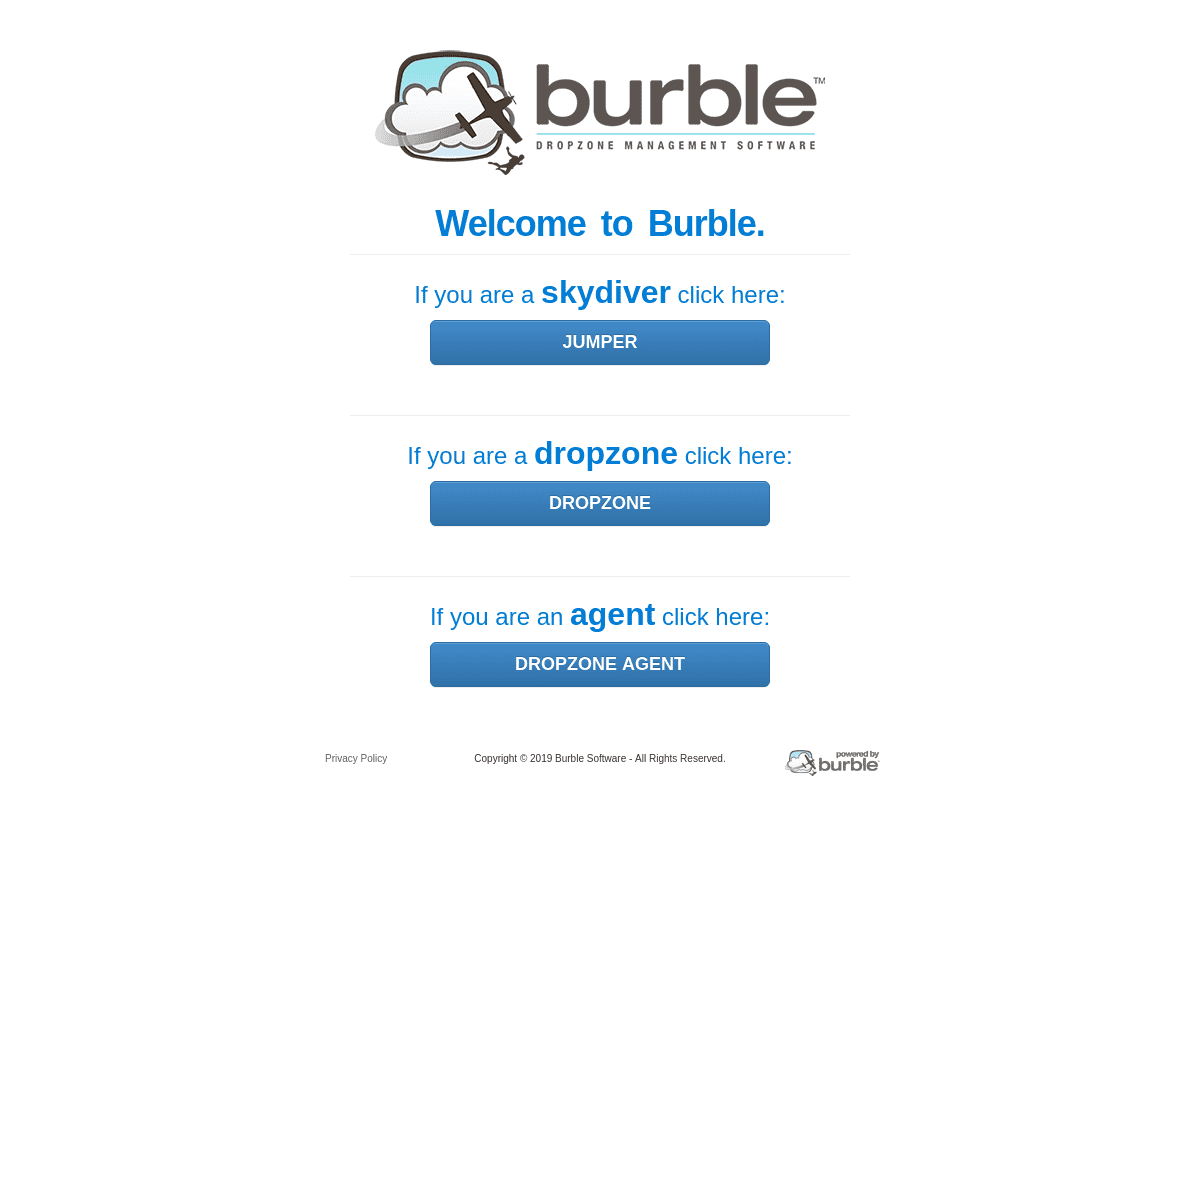 A complete backup of burblesoft.com